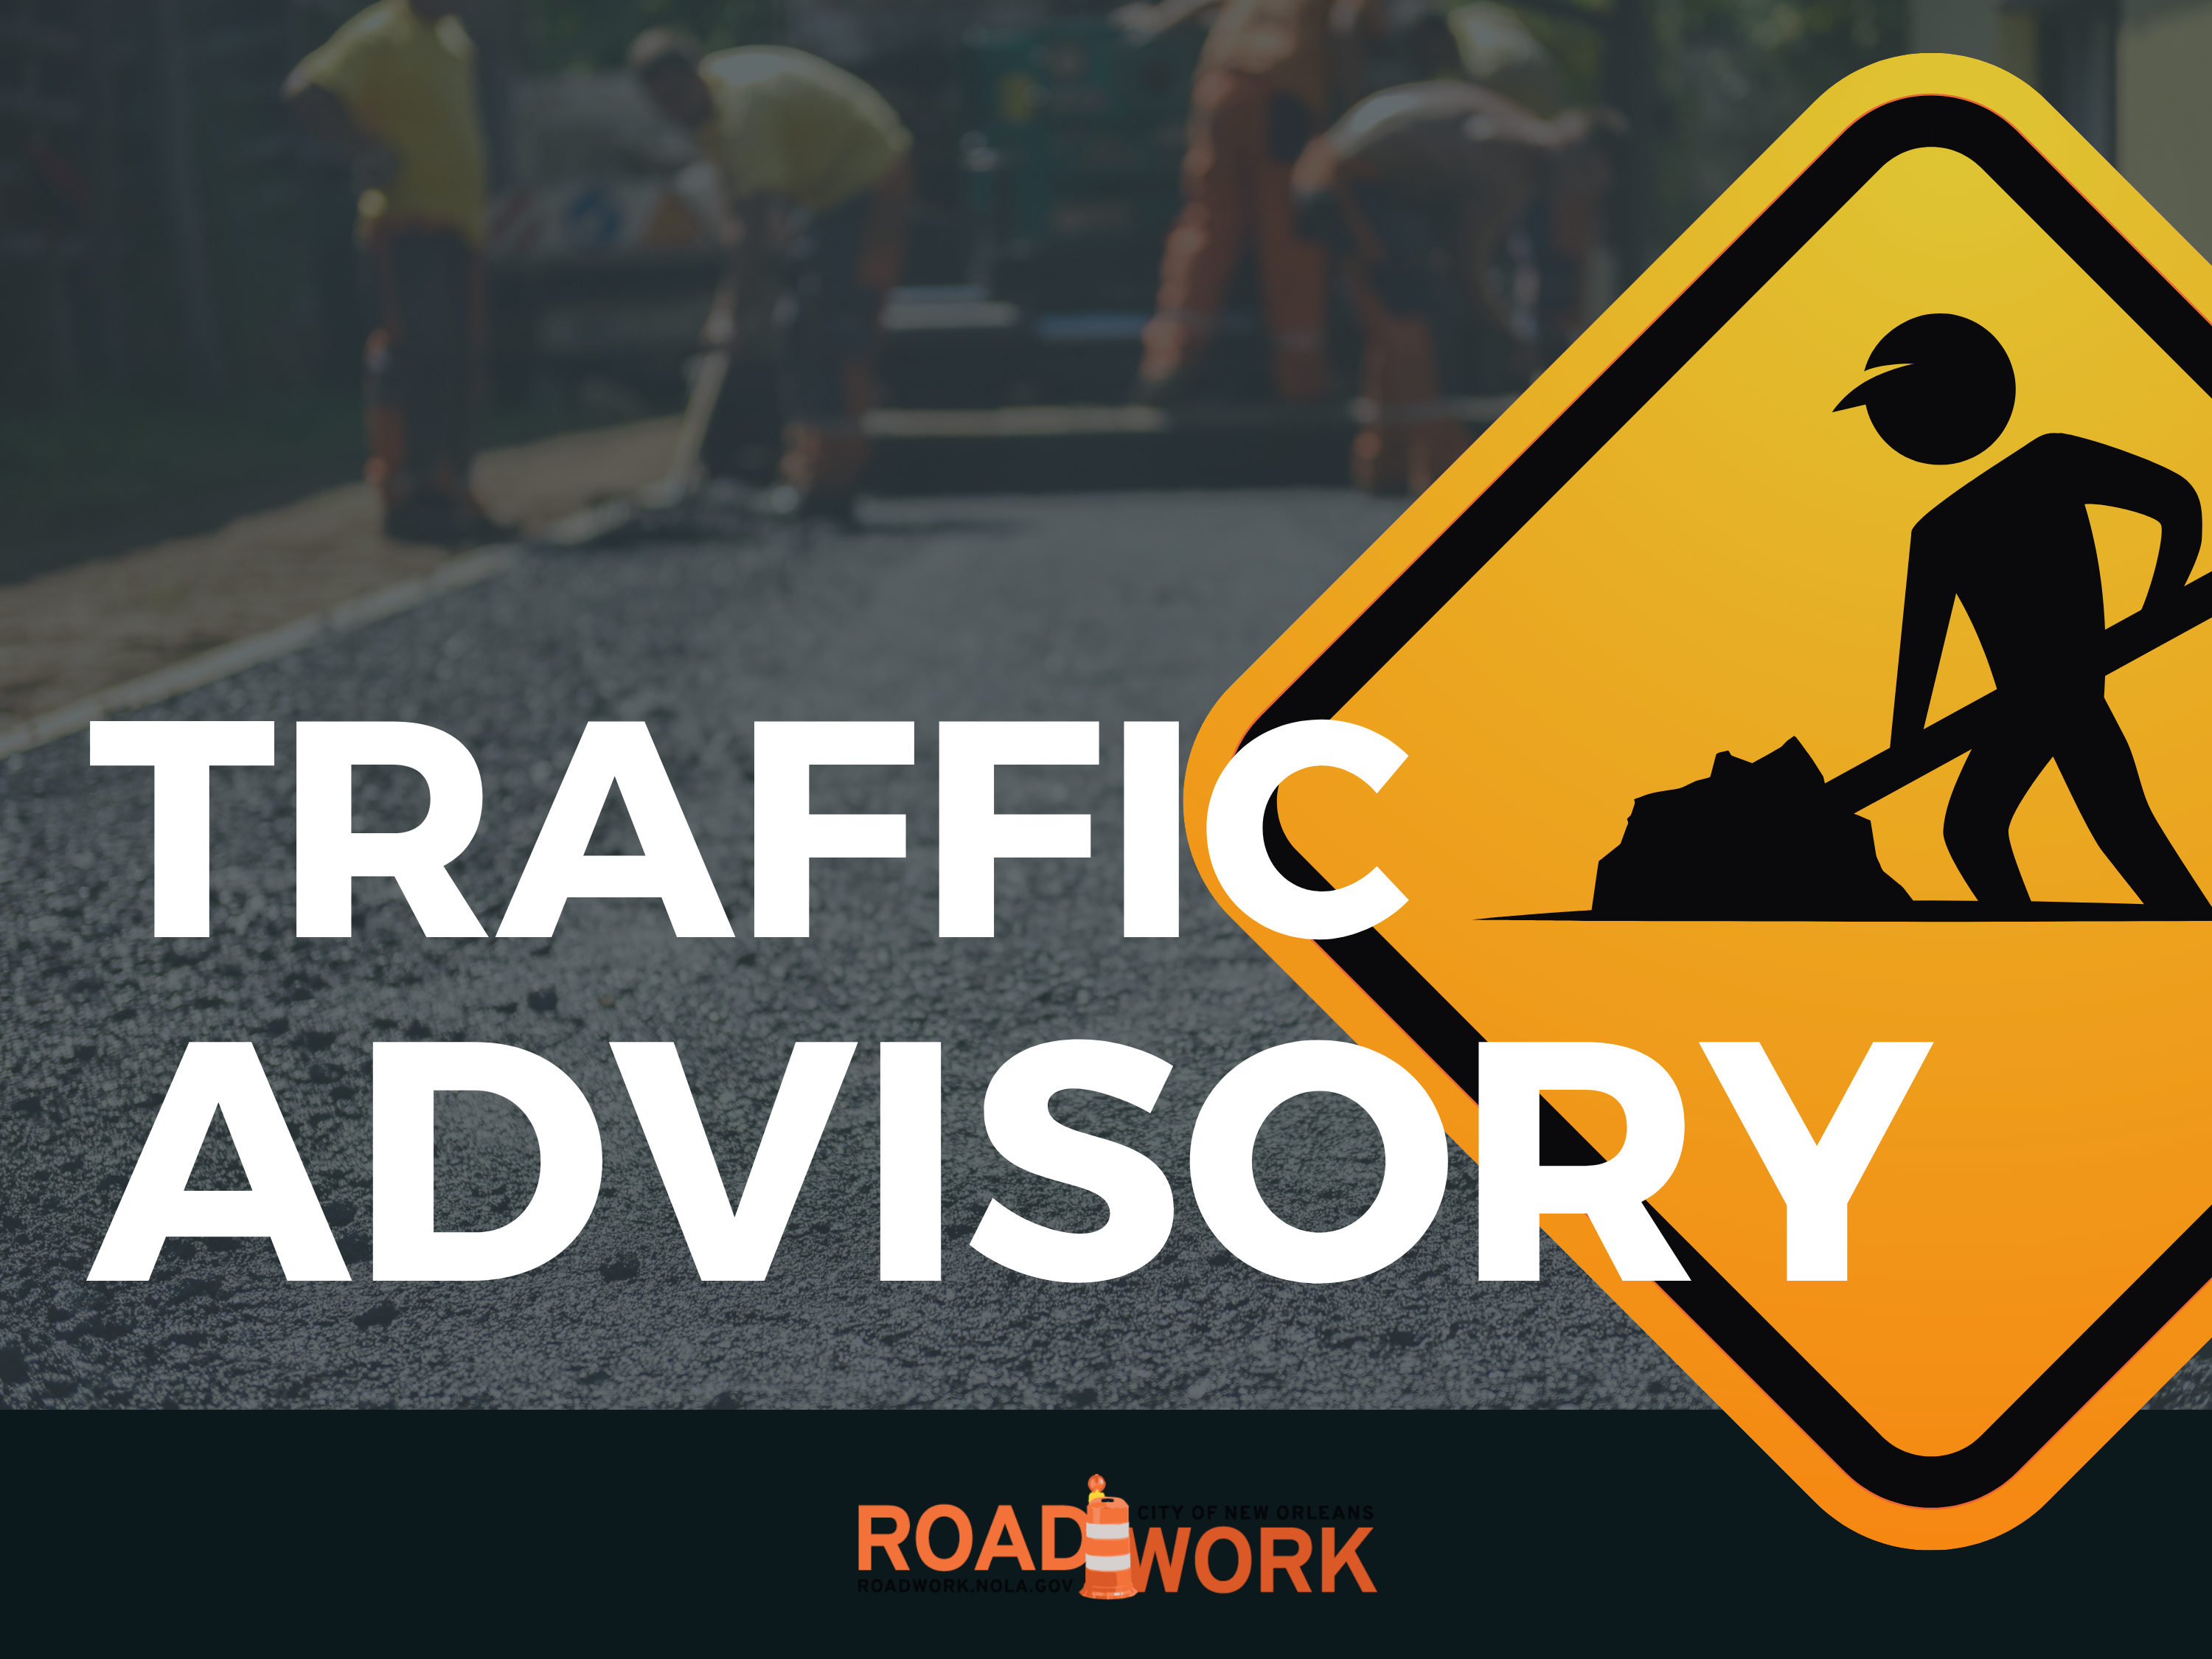 Traffic Advisory: Temporary Closure on Lake bound Canal Street between Decatur and Royal streets